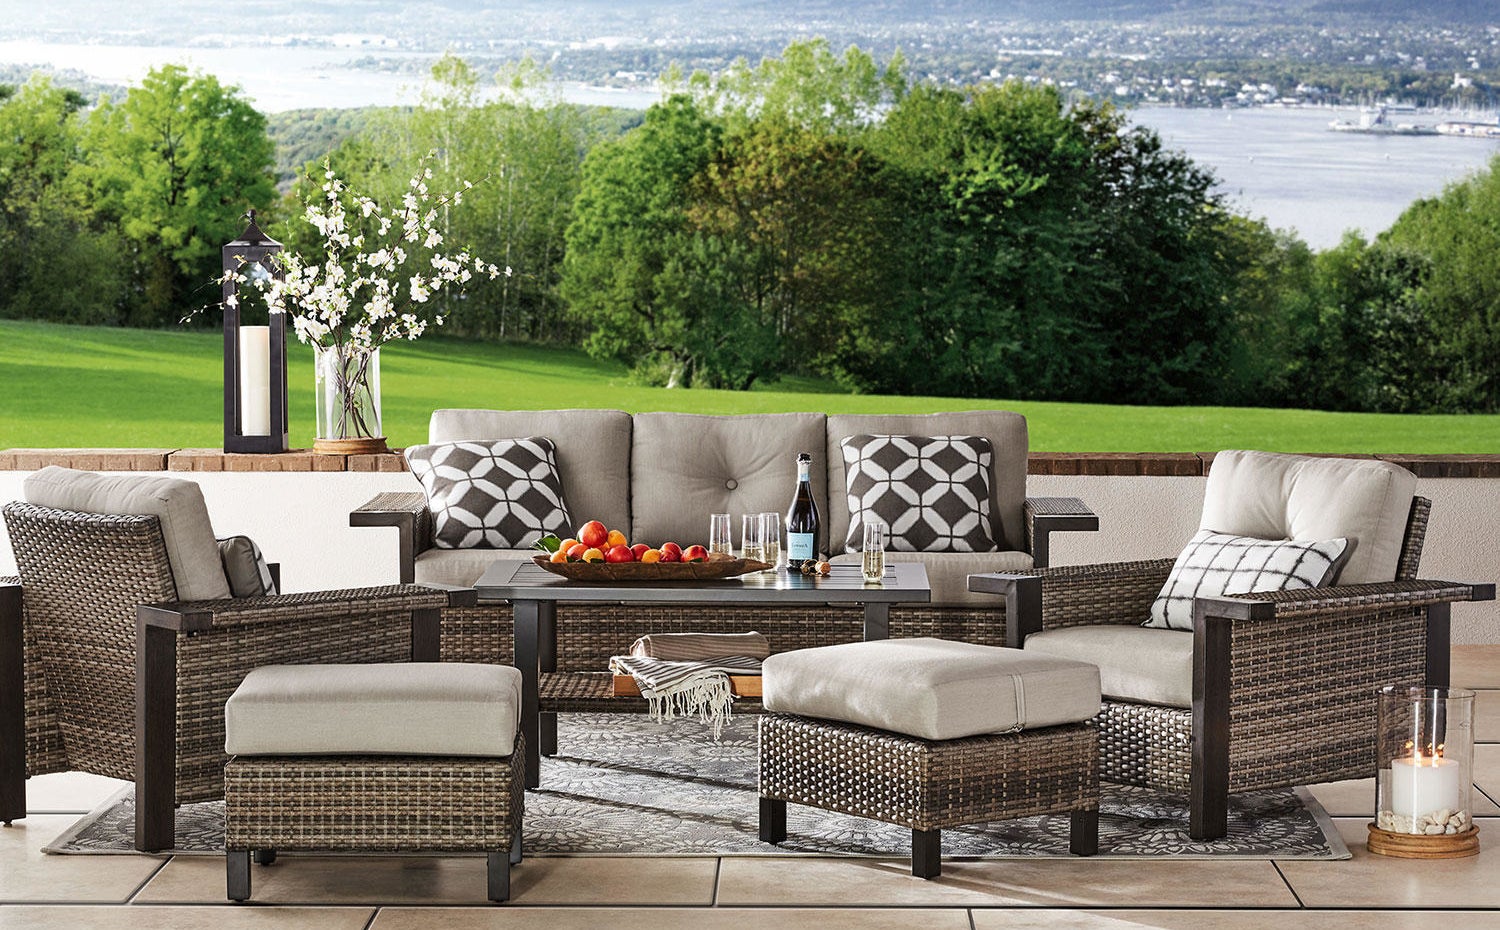 A wicker outdoor furniture set with two stools, two chairs, a table, and a couch